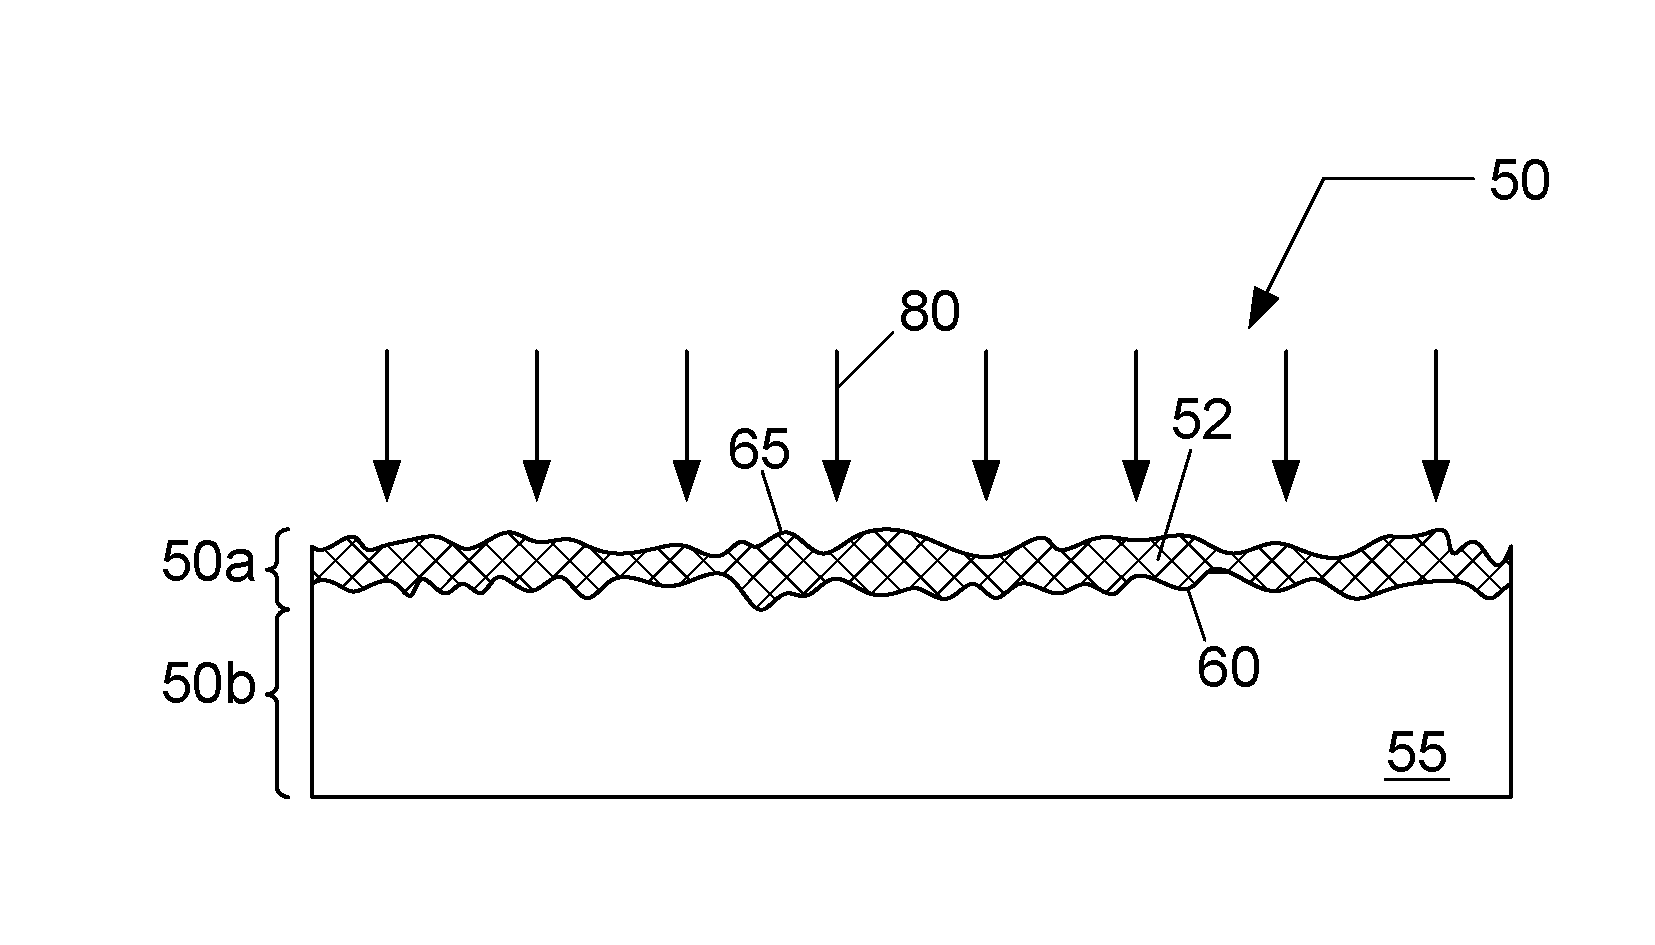 GCIB process for reducing interfacial roughness following pre-amorphization